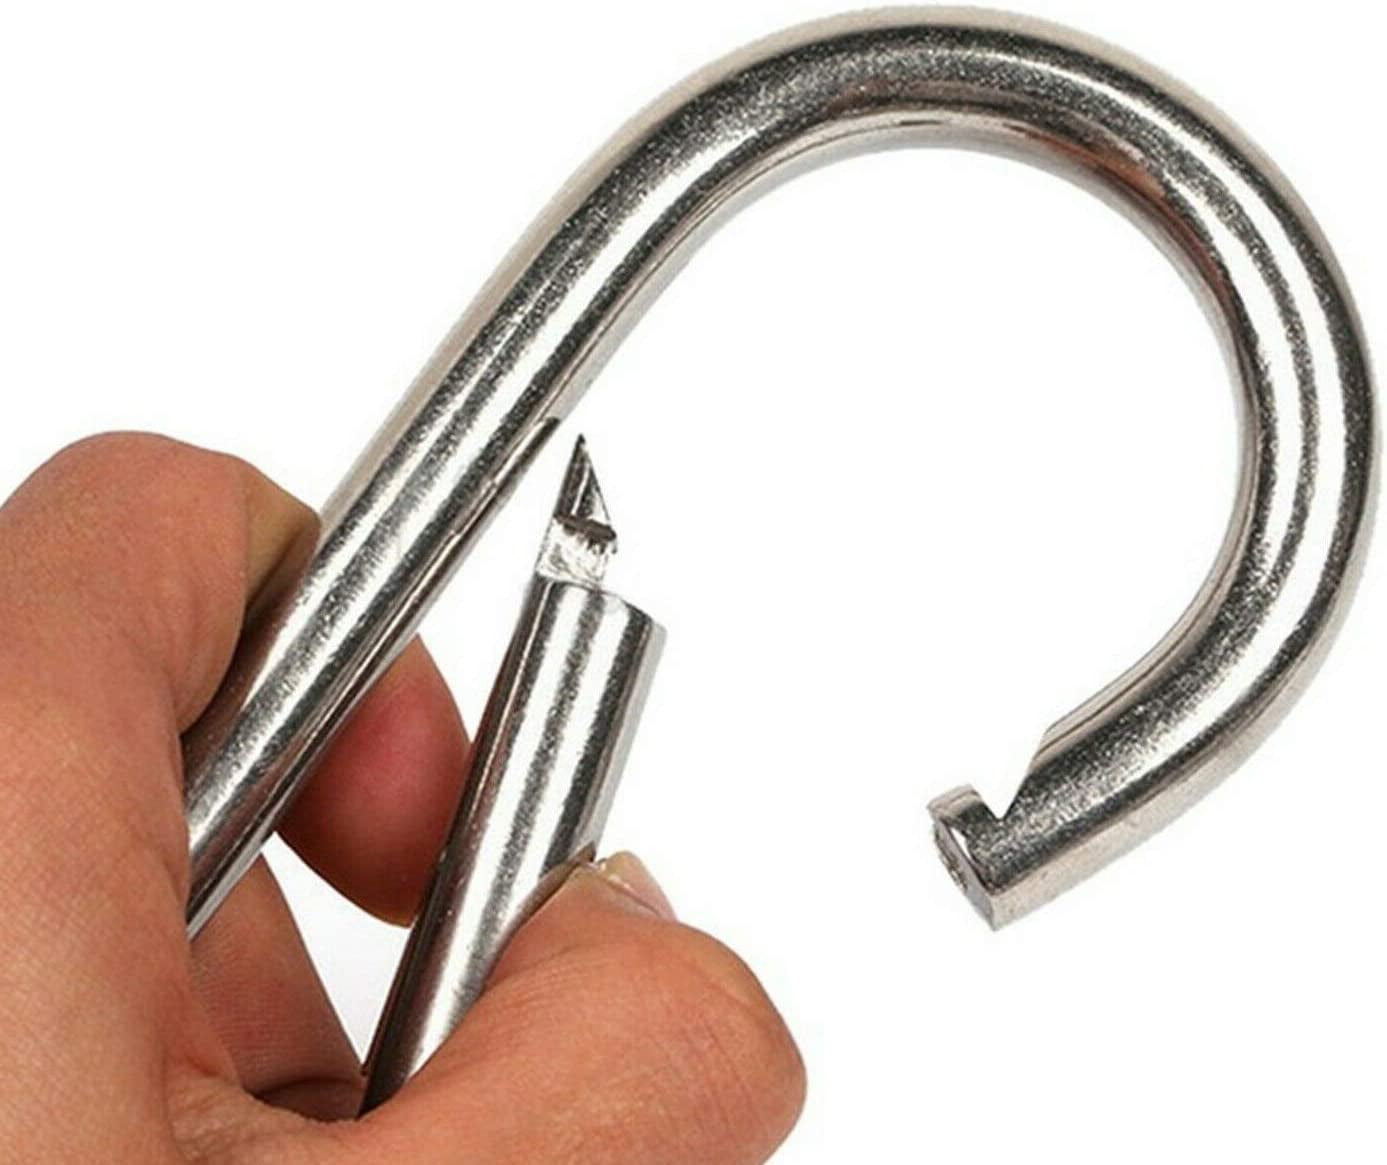 Large Carabiner Clip,5-1/2 Inch Heavy Duty Stainless Steel Spring Snap Hook  for Outdoor Living,Gym,Boating,Hammock 